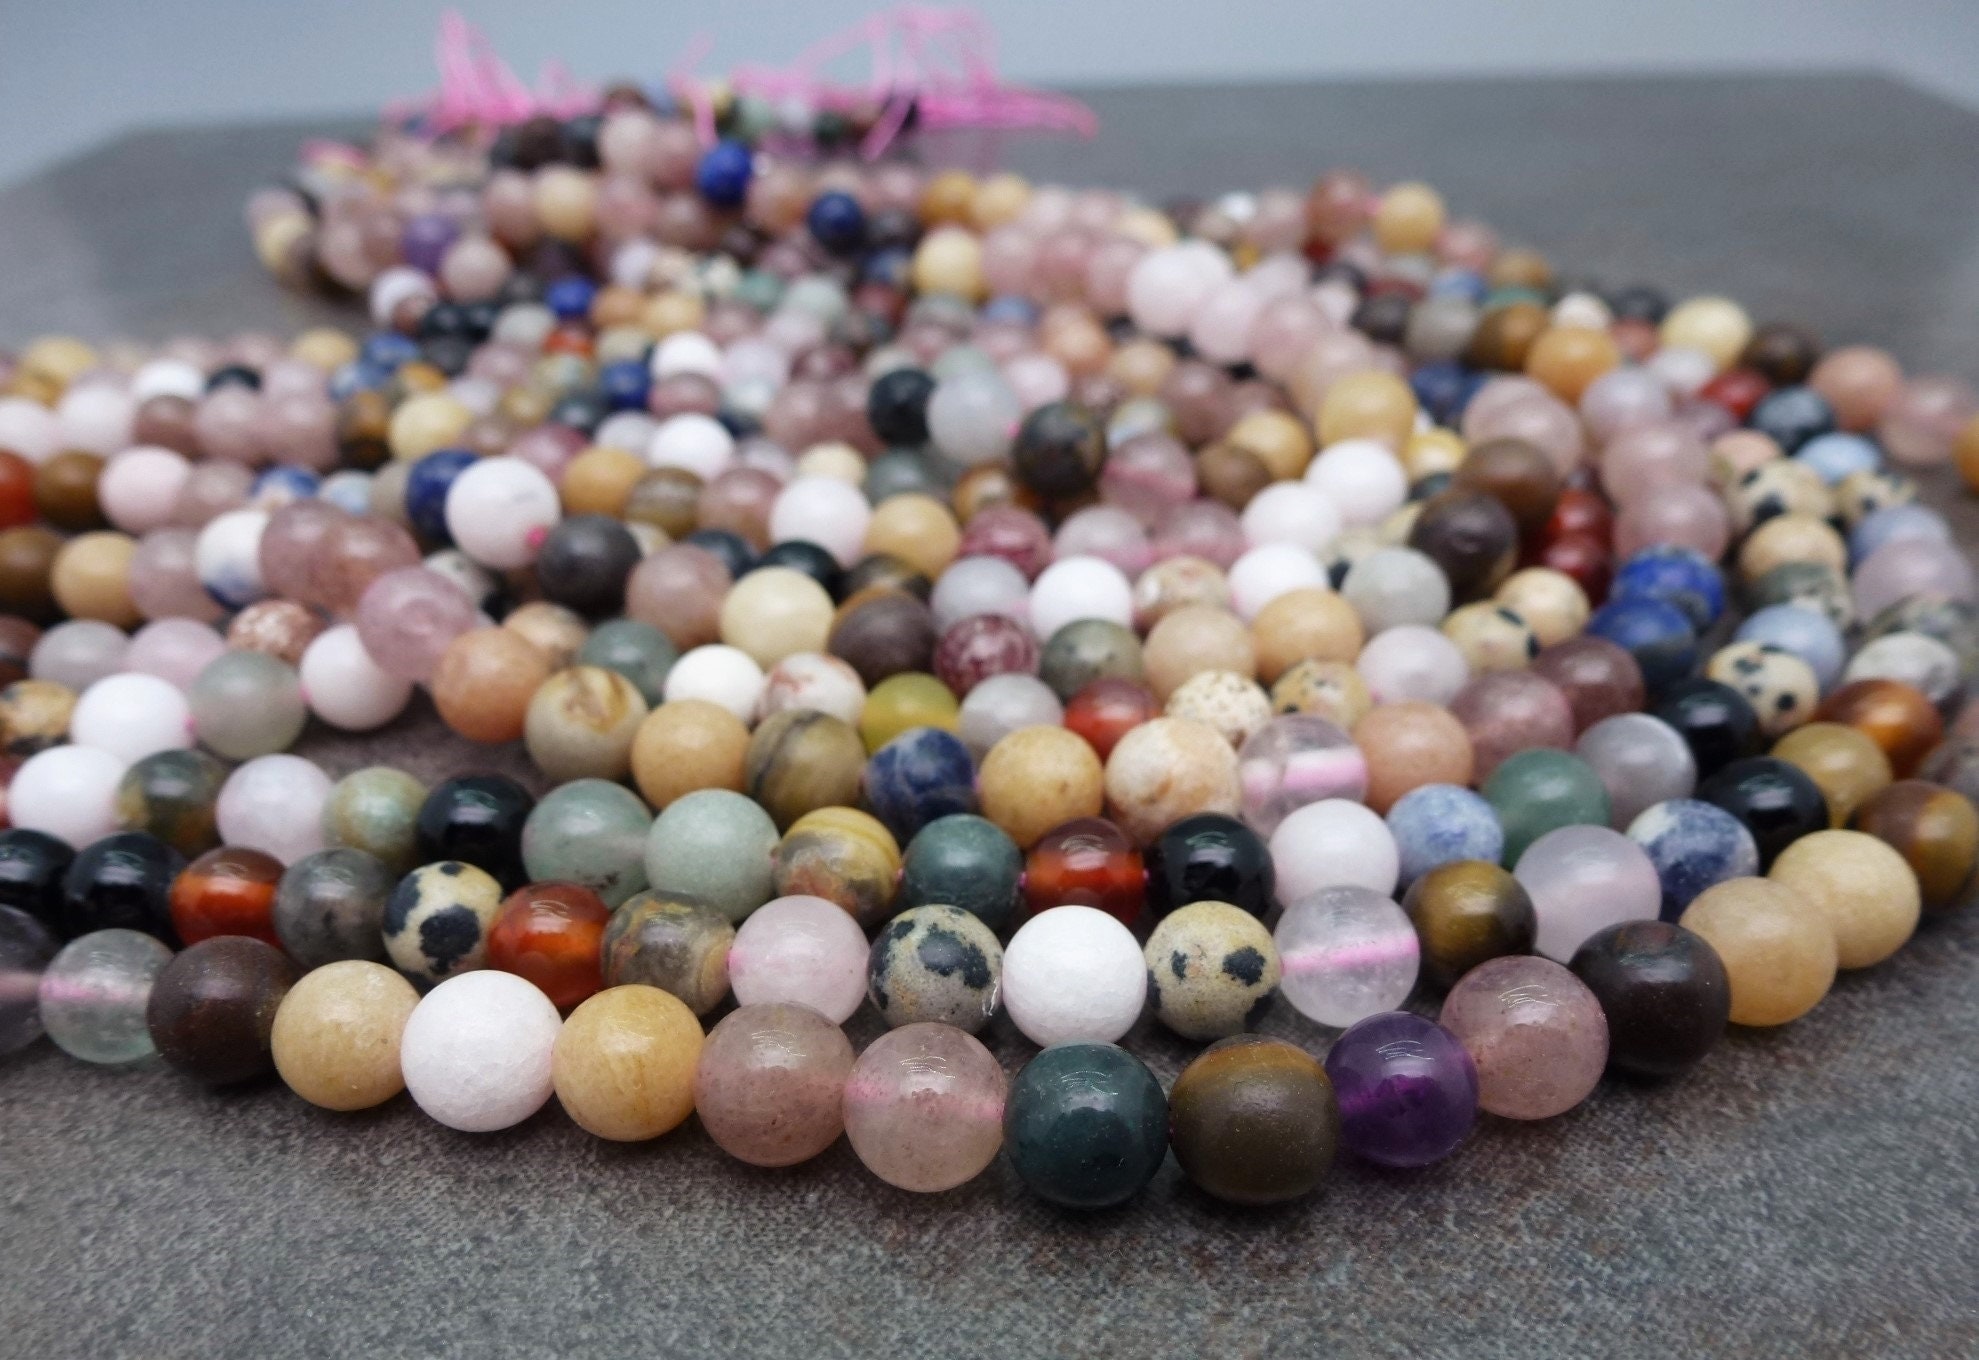  6MM Colorful Round Stone Beads Natural Emperor Jasper Loose  Beads for Jewelry Making Stone Round Loose Stone Beads for DIY Bracelets  Necklace(ZS-1215-GreenMix*6MM)